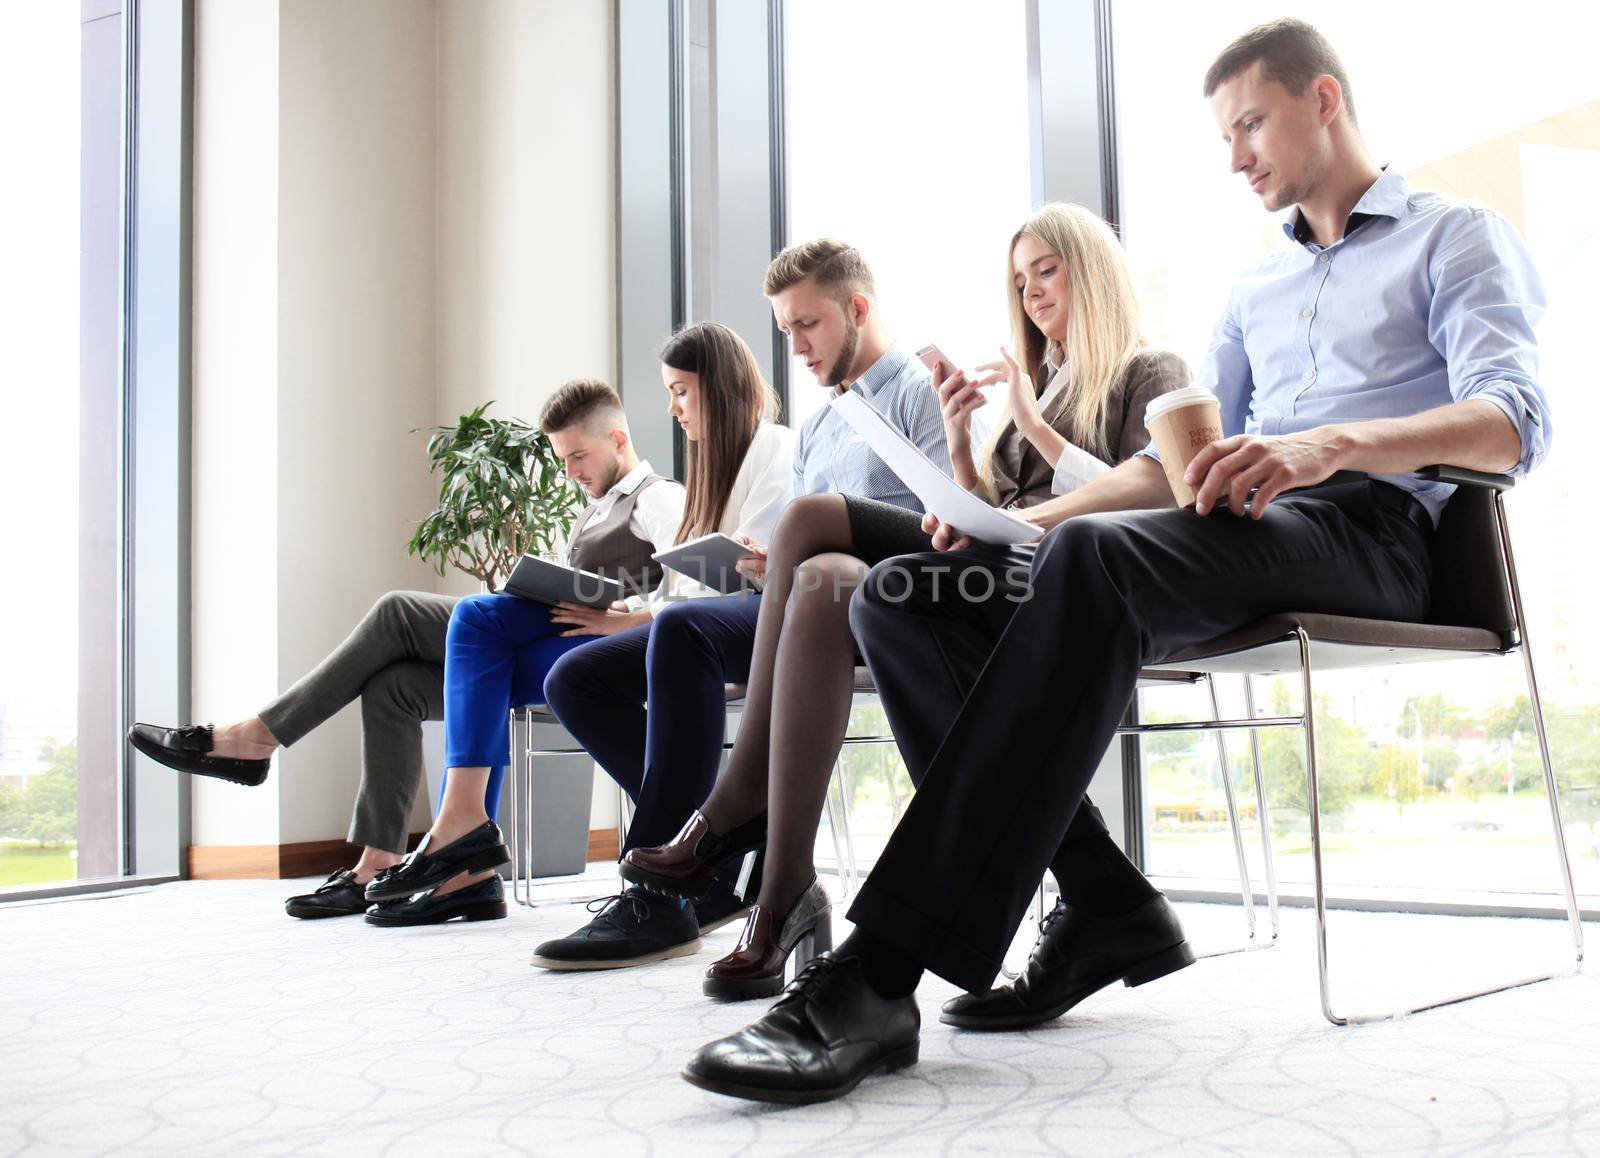 Business people waiting for job interview by tsyhun